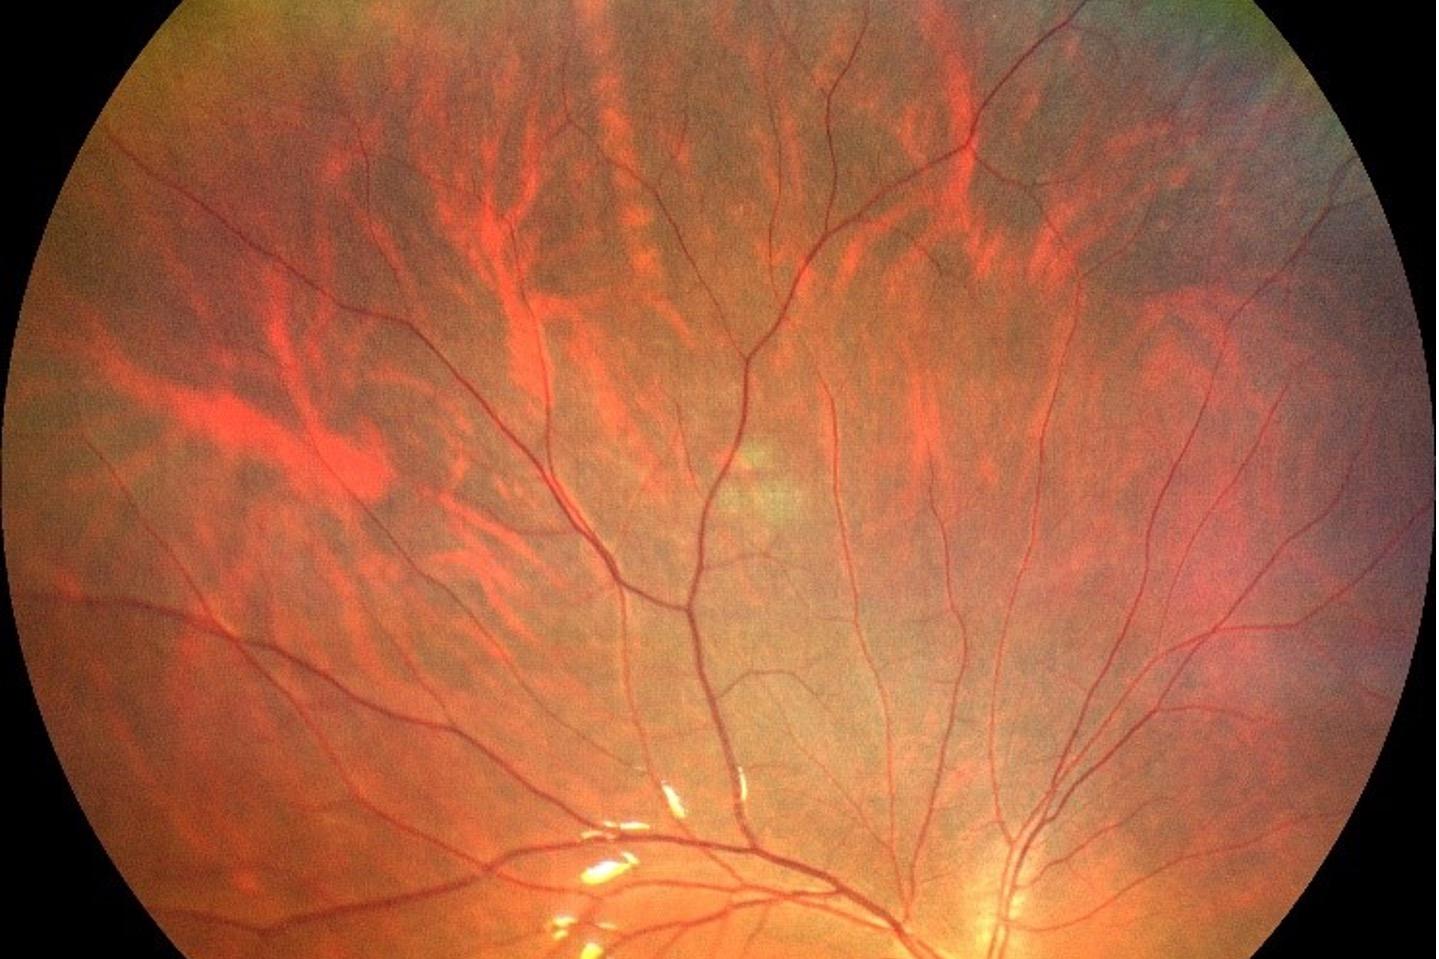 ZEISS CLARUS 500 ultra-wide field image captures peripheral retinal in a myopic eye. Orra serrata structures with dentate processes and meridional folds are viewable.